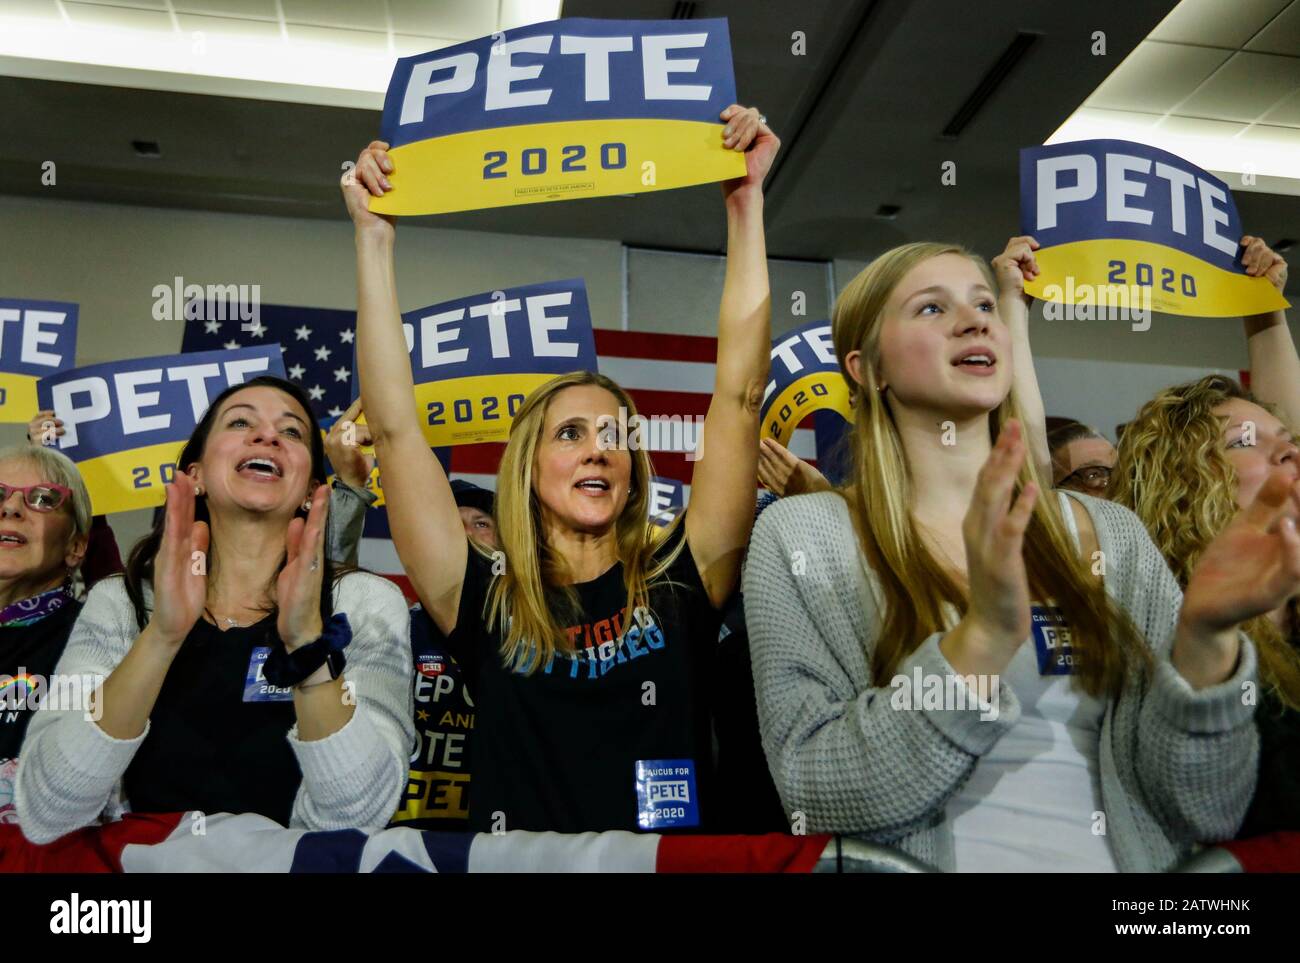 Iowa, USA. 1st Feb, 2020. Supporters are seen at Pete Buttigieg's rally in Cedar Rapids, Iowa, the United States, Feb. 1, 2020. Pete Buttigieg, former mayor of South Bend, Indiana, and U.S. Senator Bernie Sanders are leading in the first set of Iowa Democratic caucus results released Tuesday afternoon. Credit: Joel Lerner/Xinhua/Alamy Live News Stock Photo